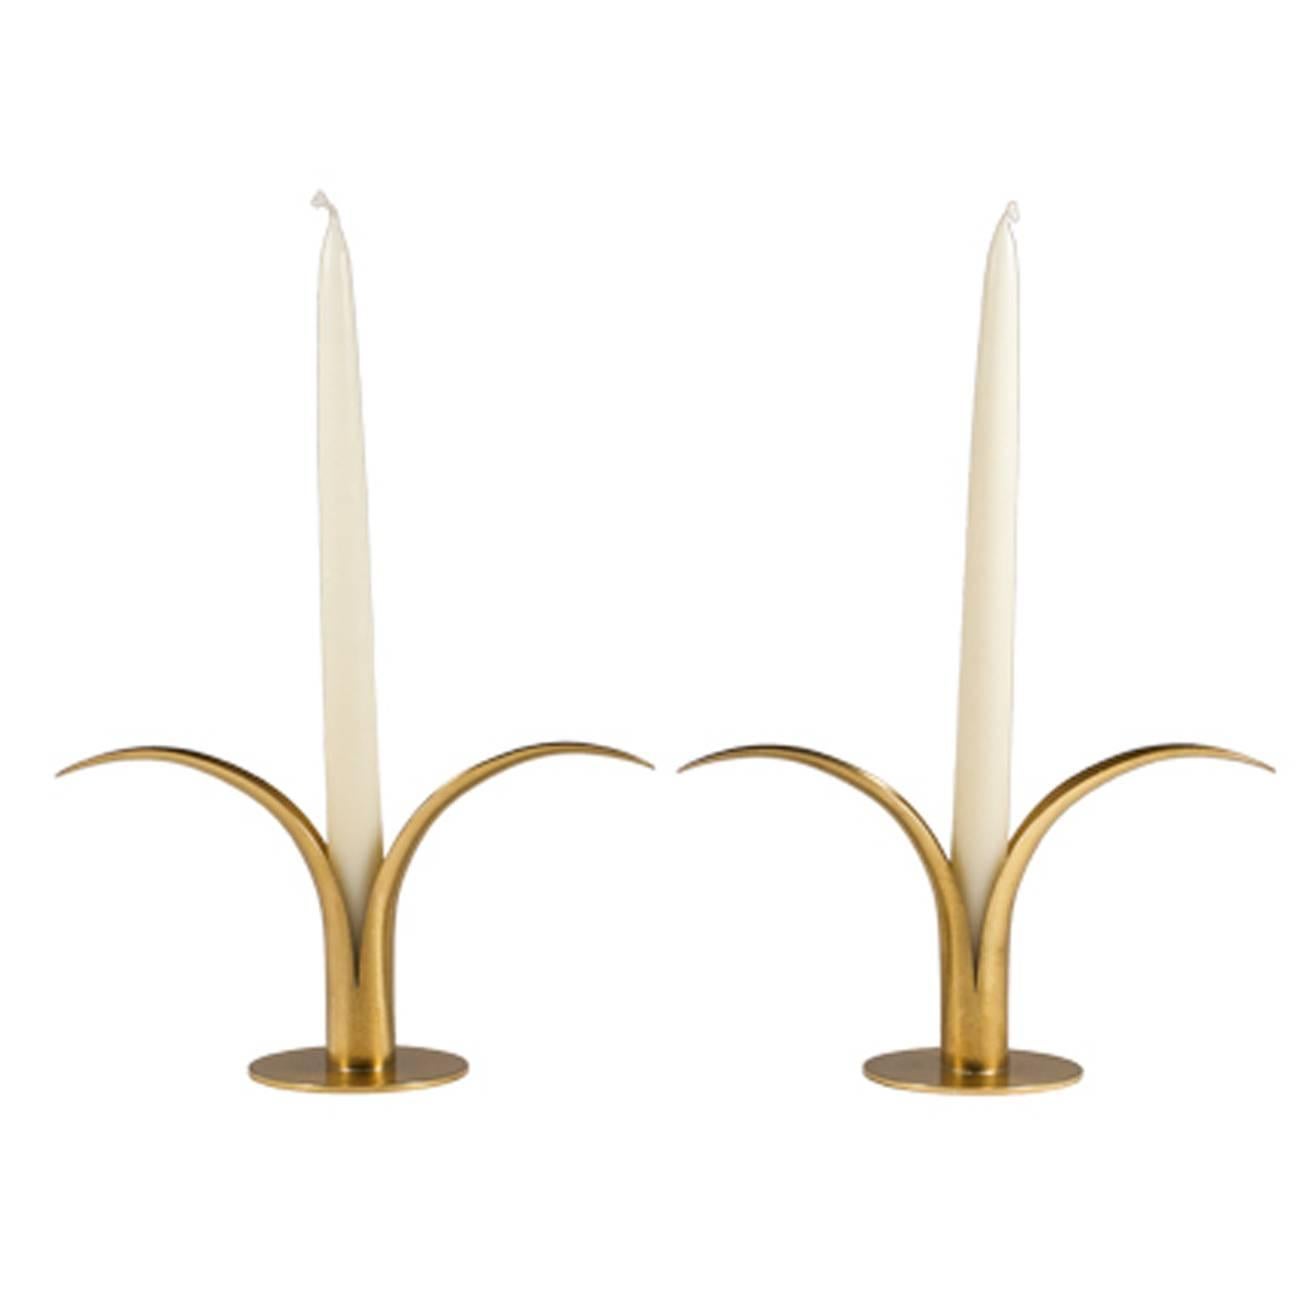 A pair of brass tulip candleholders by Ystad, Sweden. Sold as a pair. Six pairs are available.